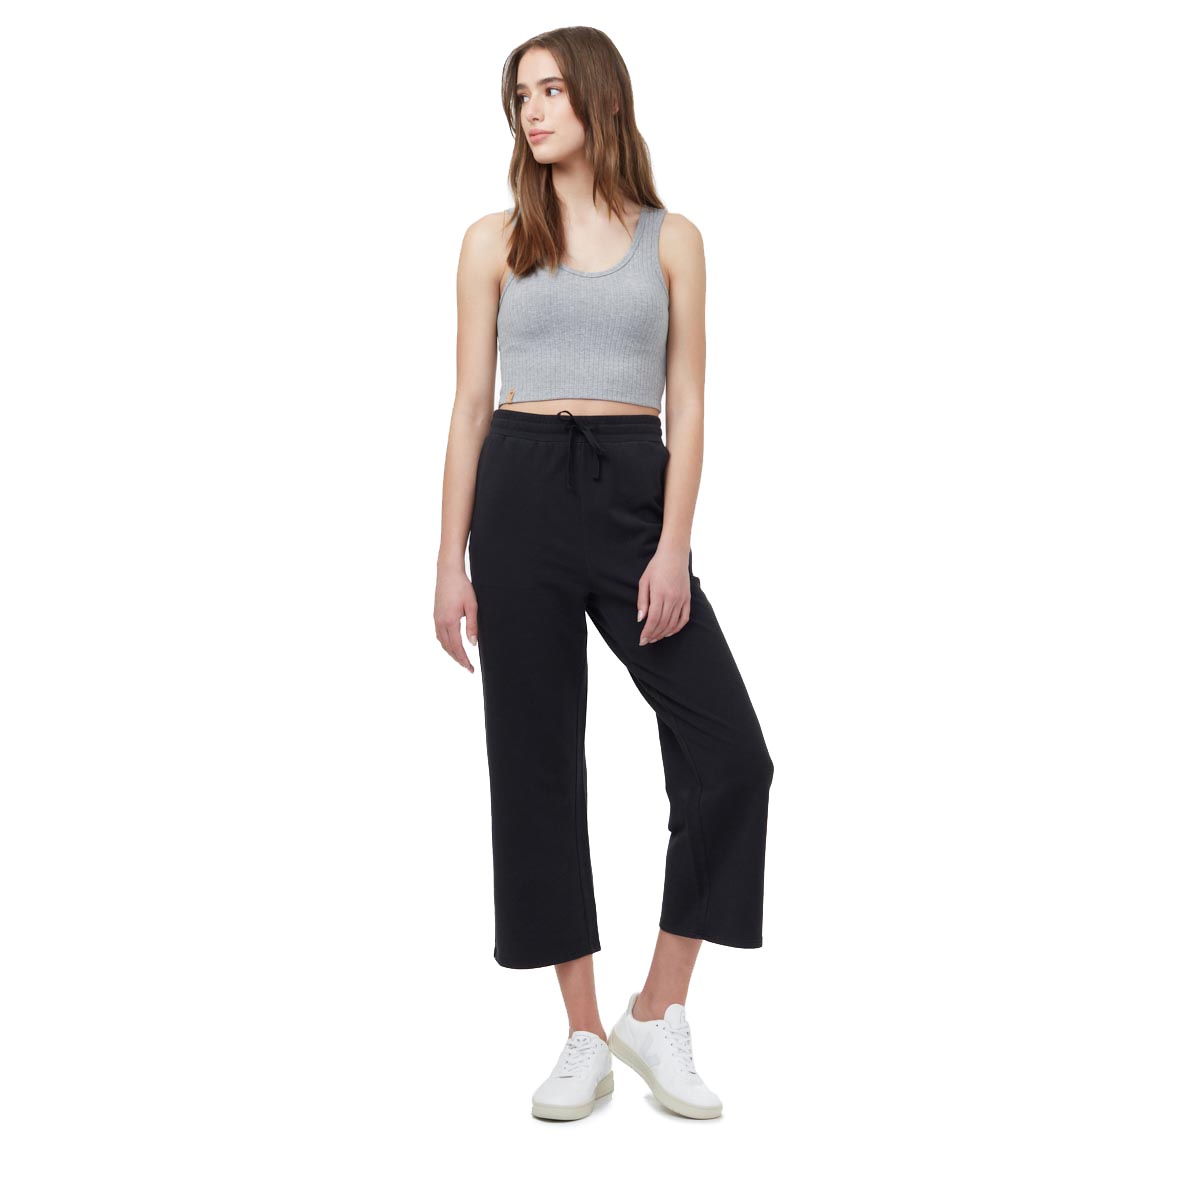 Tentree Women's Cropped Fitted Tank